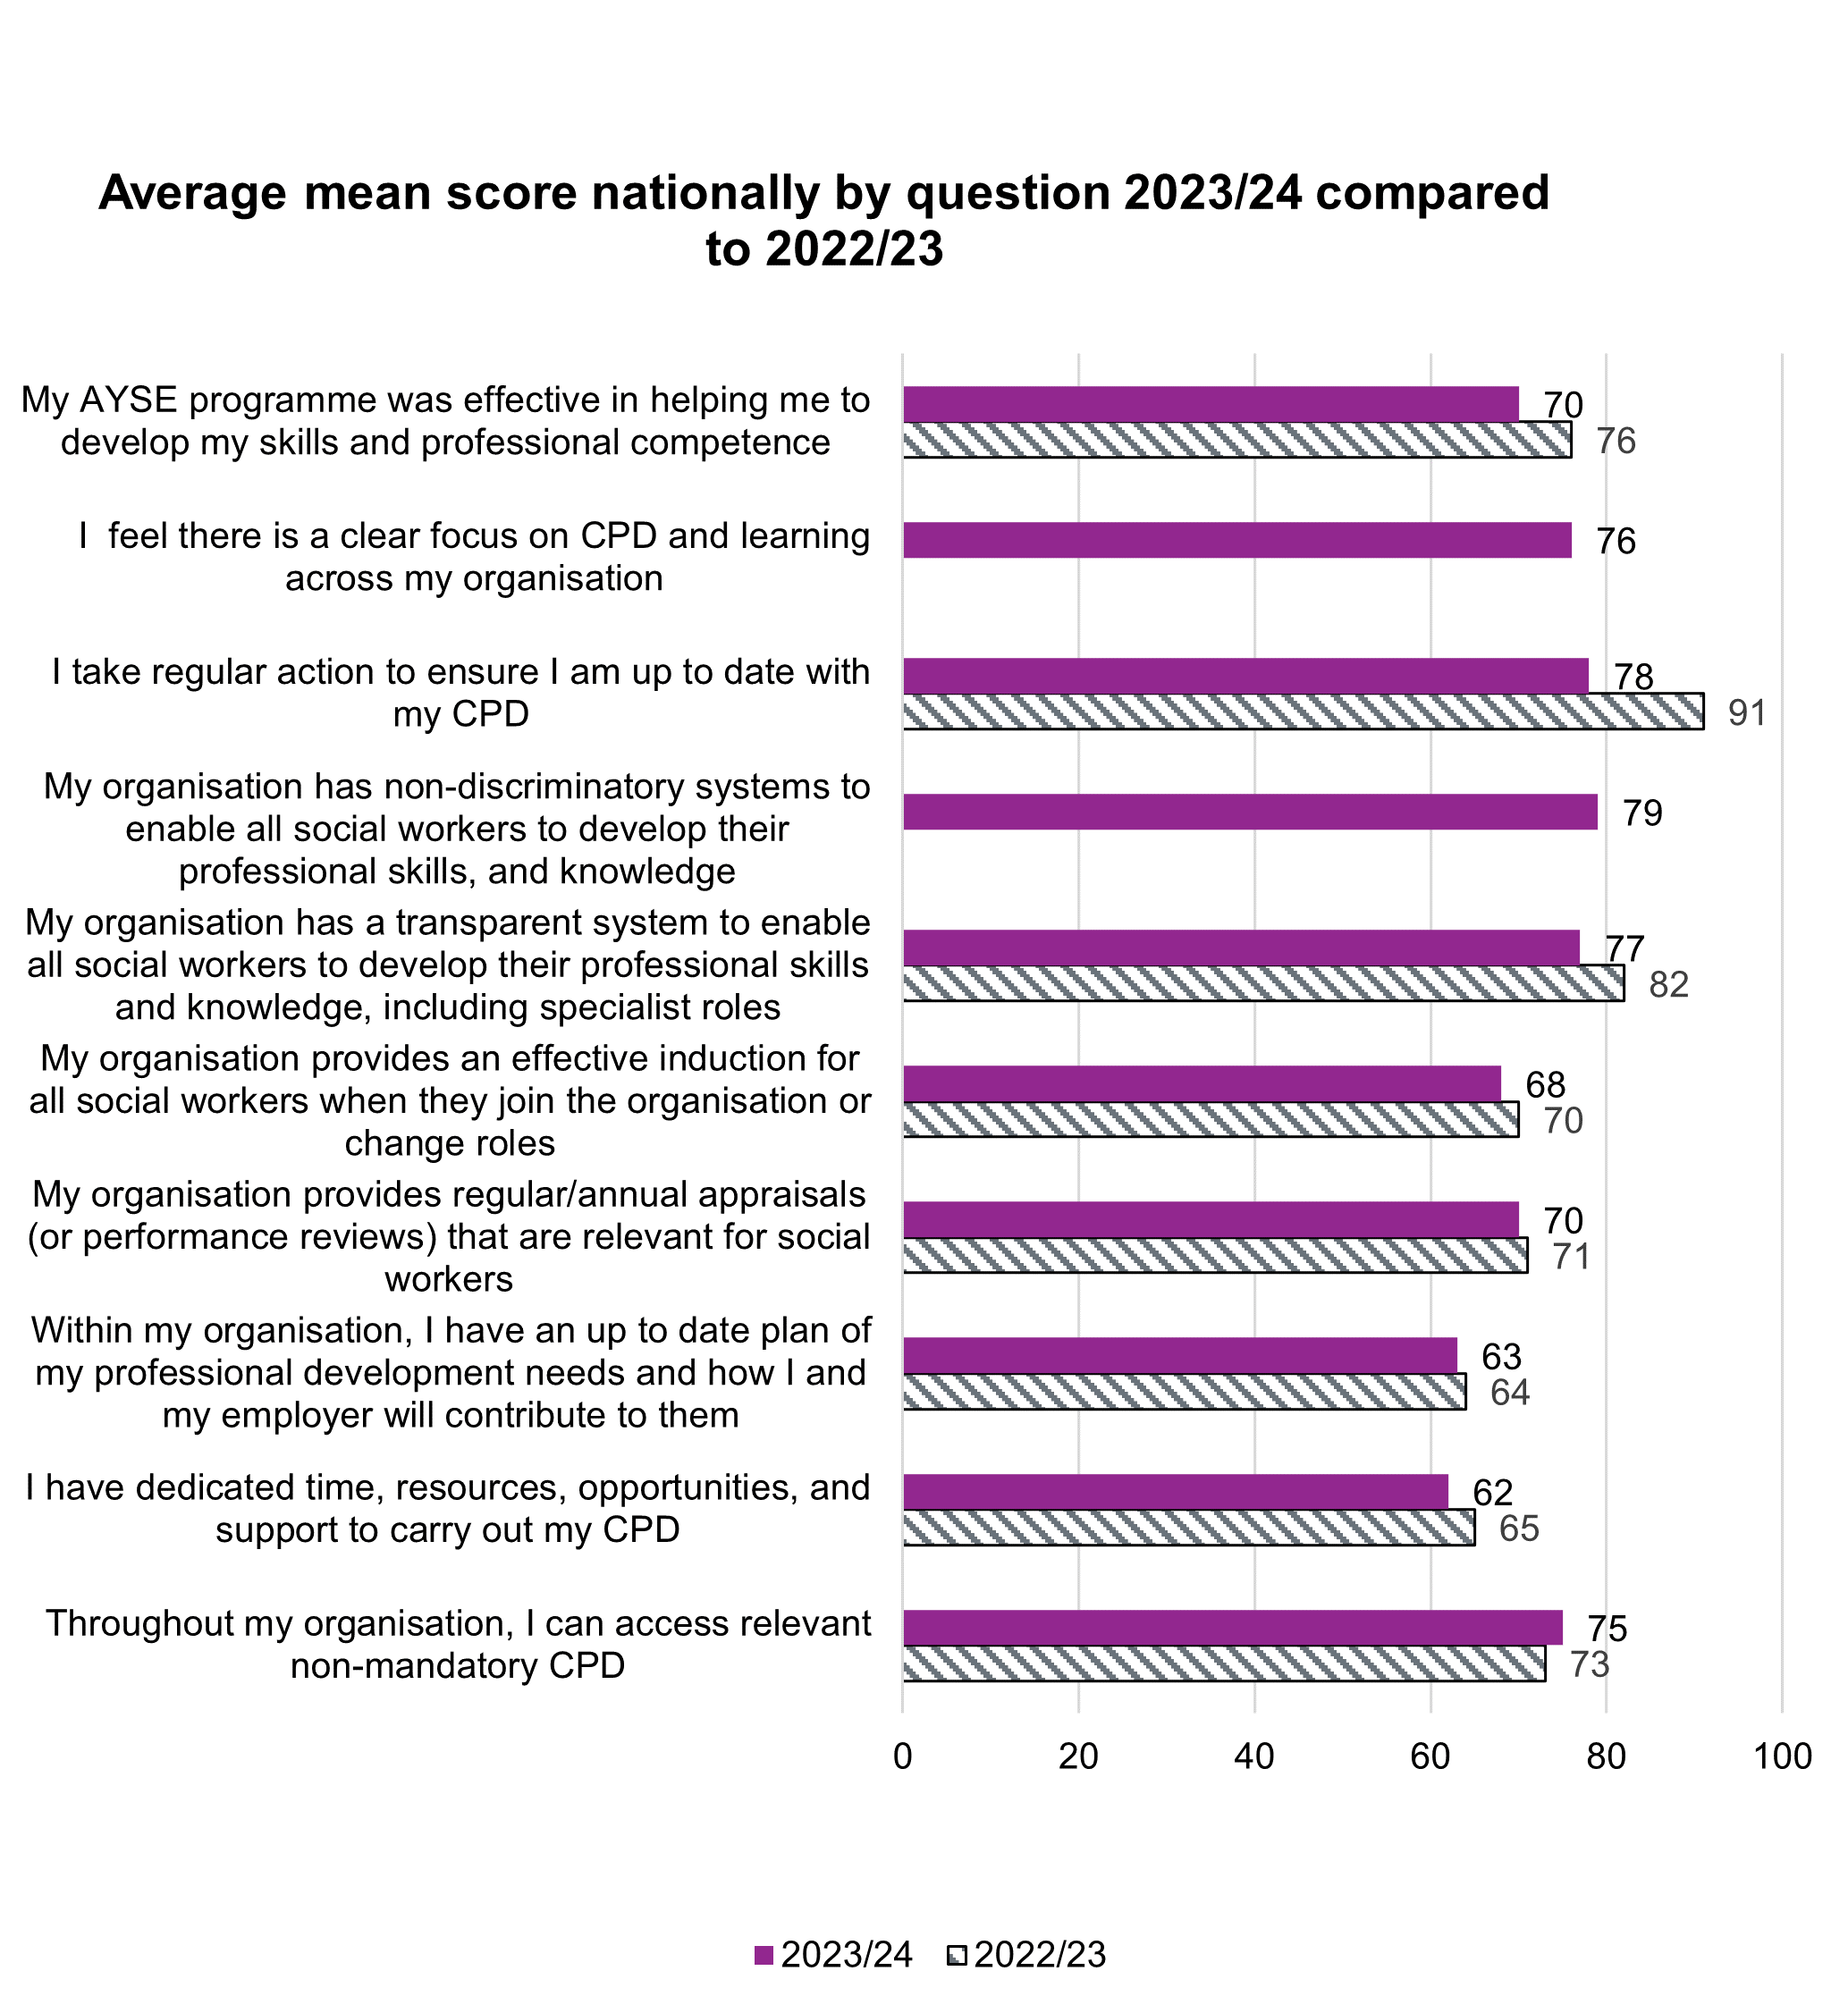 Average mean score nationally by question for 2023-24 compared to 2022-23 for continued professional development questions